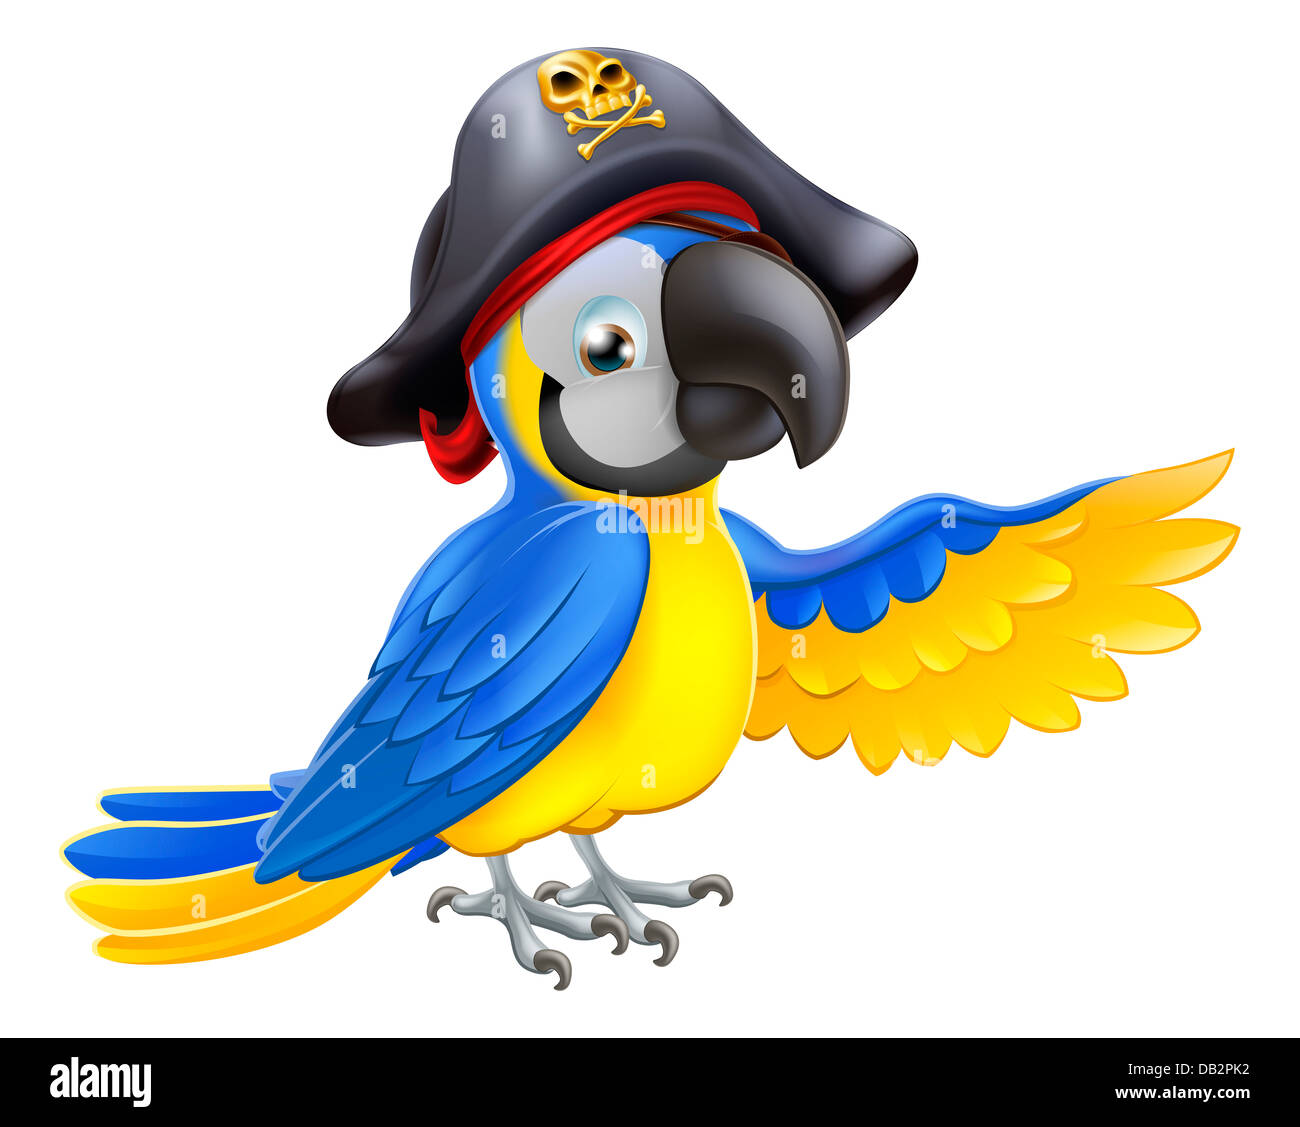 A drawing of a cartoon parrot pirate character with eye patch and hat with skull and crossbones pointing with its wing Stock Photo